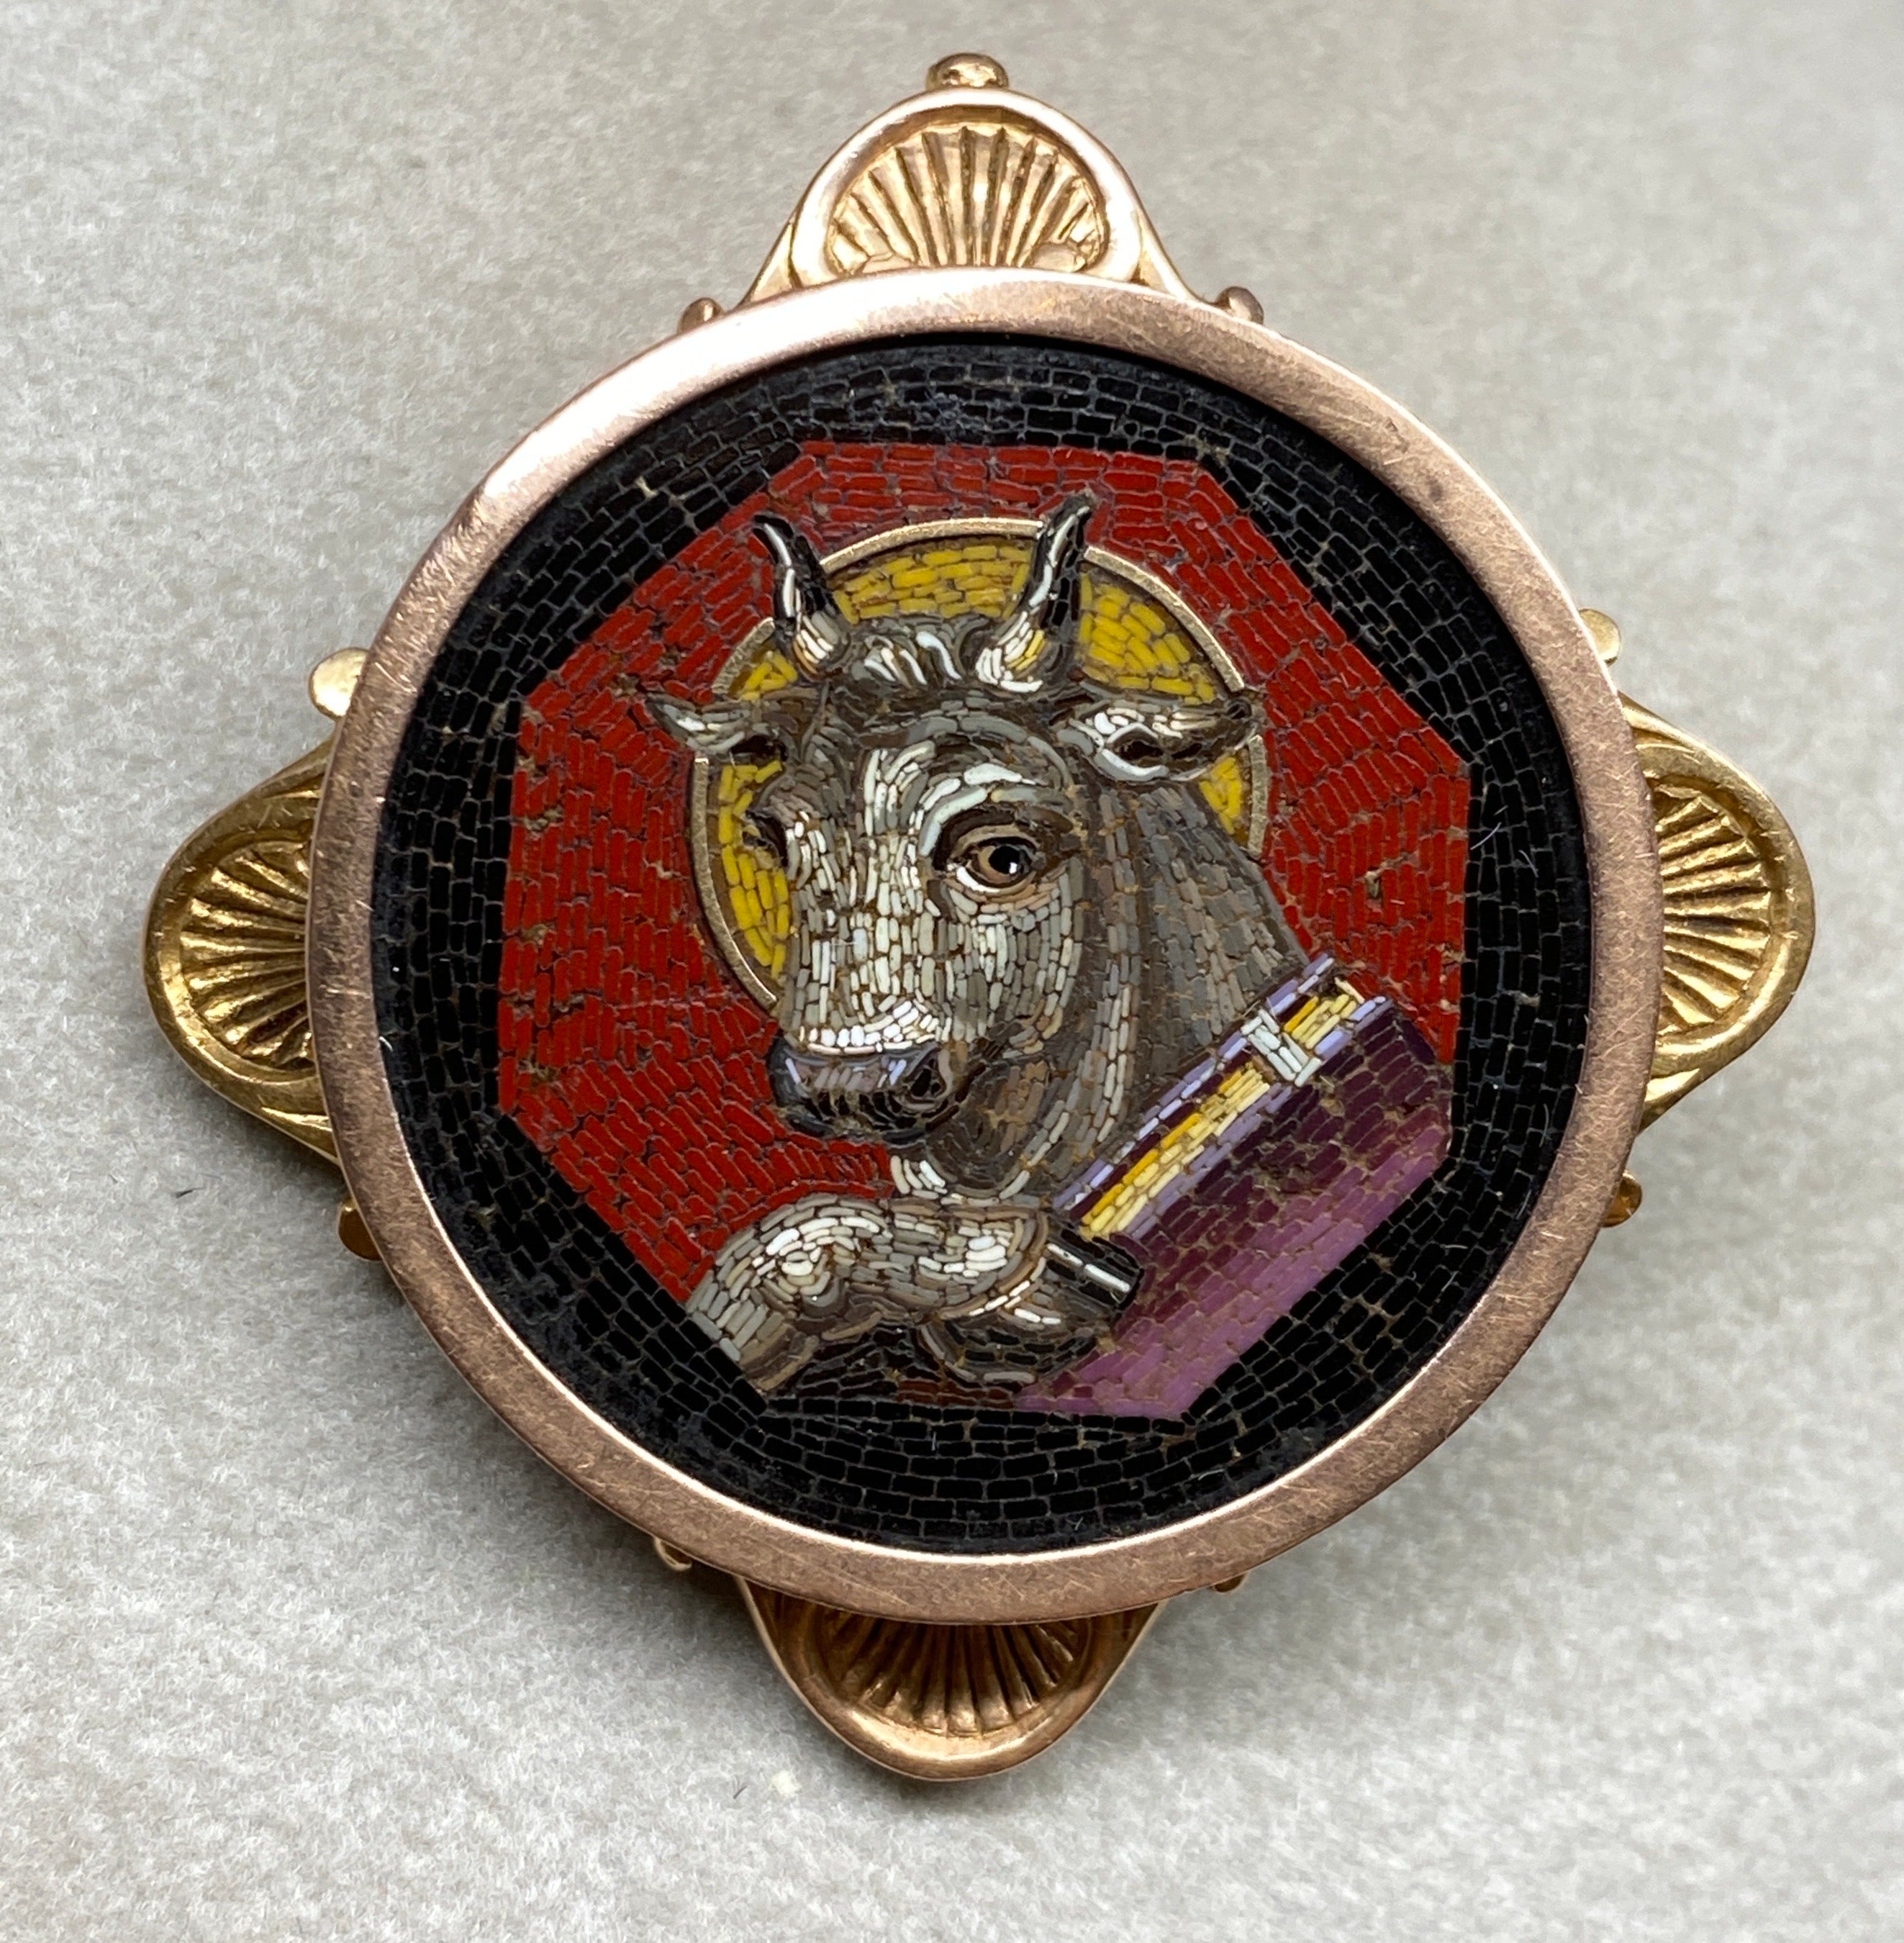 Up for your consideration is this exceptional Italian micromosaic brooch circa 1850's.
This extraordinary miniature work of art is exceptional in its craftmanship and details from the shading of the bull to the highlights of the horns. 

At the